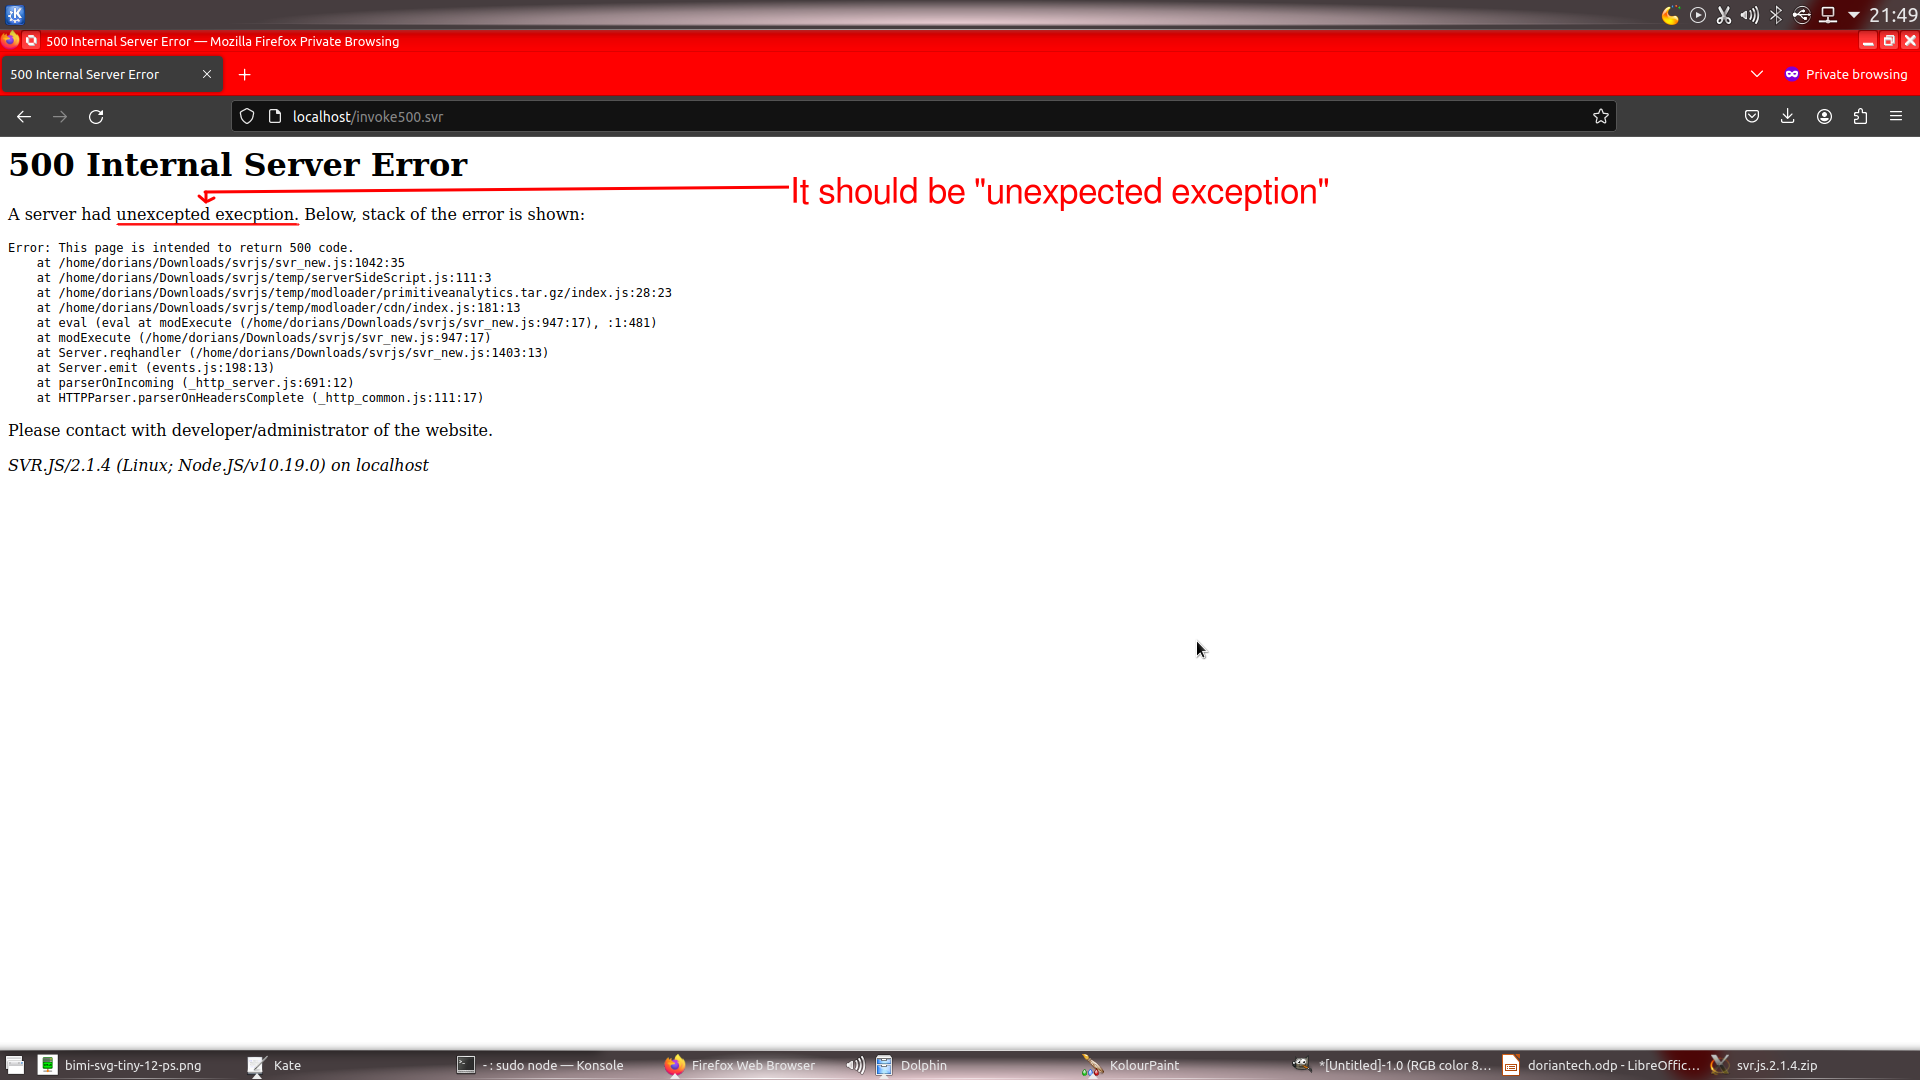 SVR.JS 2.x had a misspelling in 500 error page: "unexcepted execption". The error page was rewritten in SVR.JS 3.x